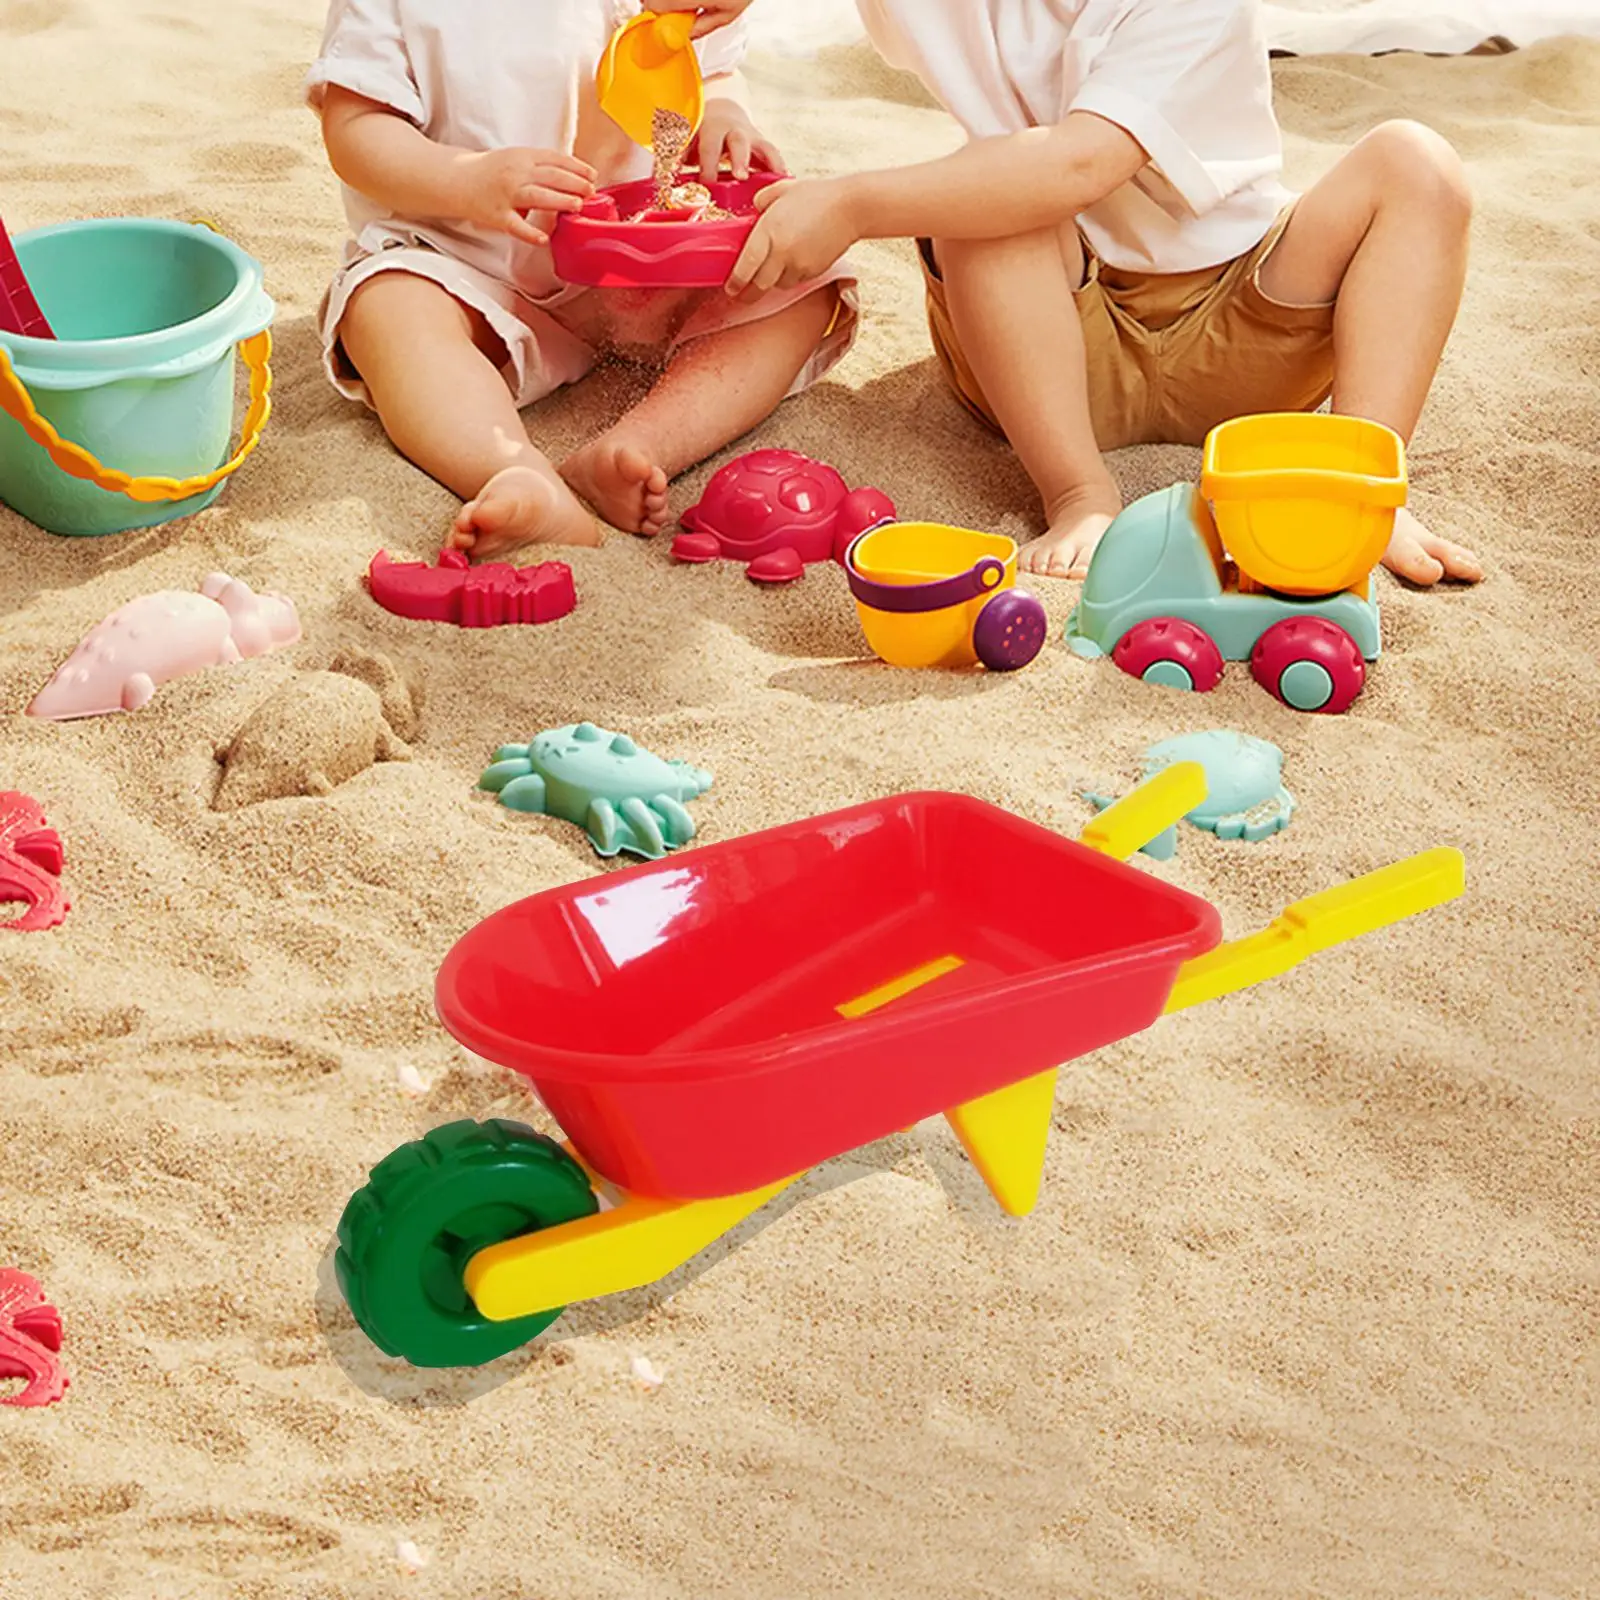 Sand Wheelbarrow Toy Lightweight for Sand, Snow, Plant Transfer, Outdoor Beach Game Toy for Kids Yard Indoors and Outdoors